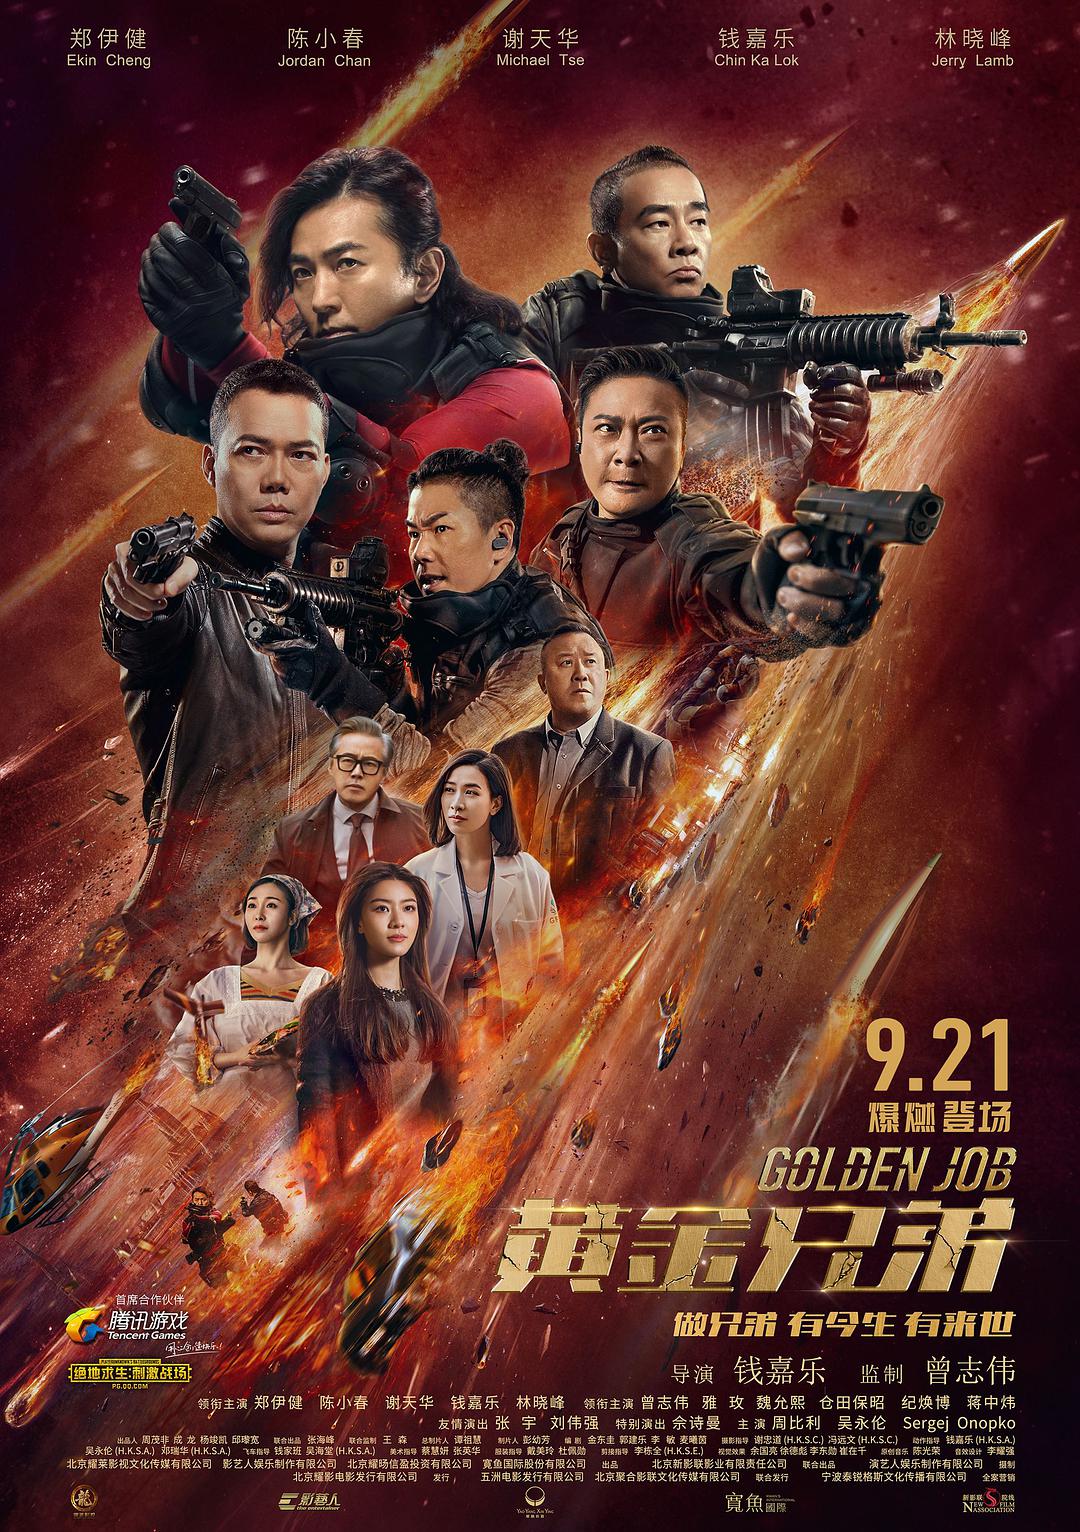 Golden Job (2018) [Chinese] Mp4 Download